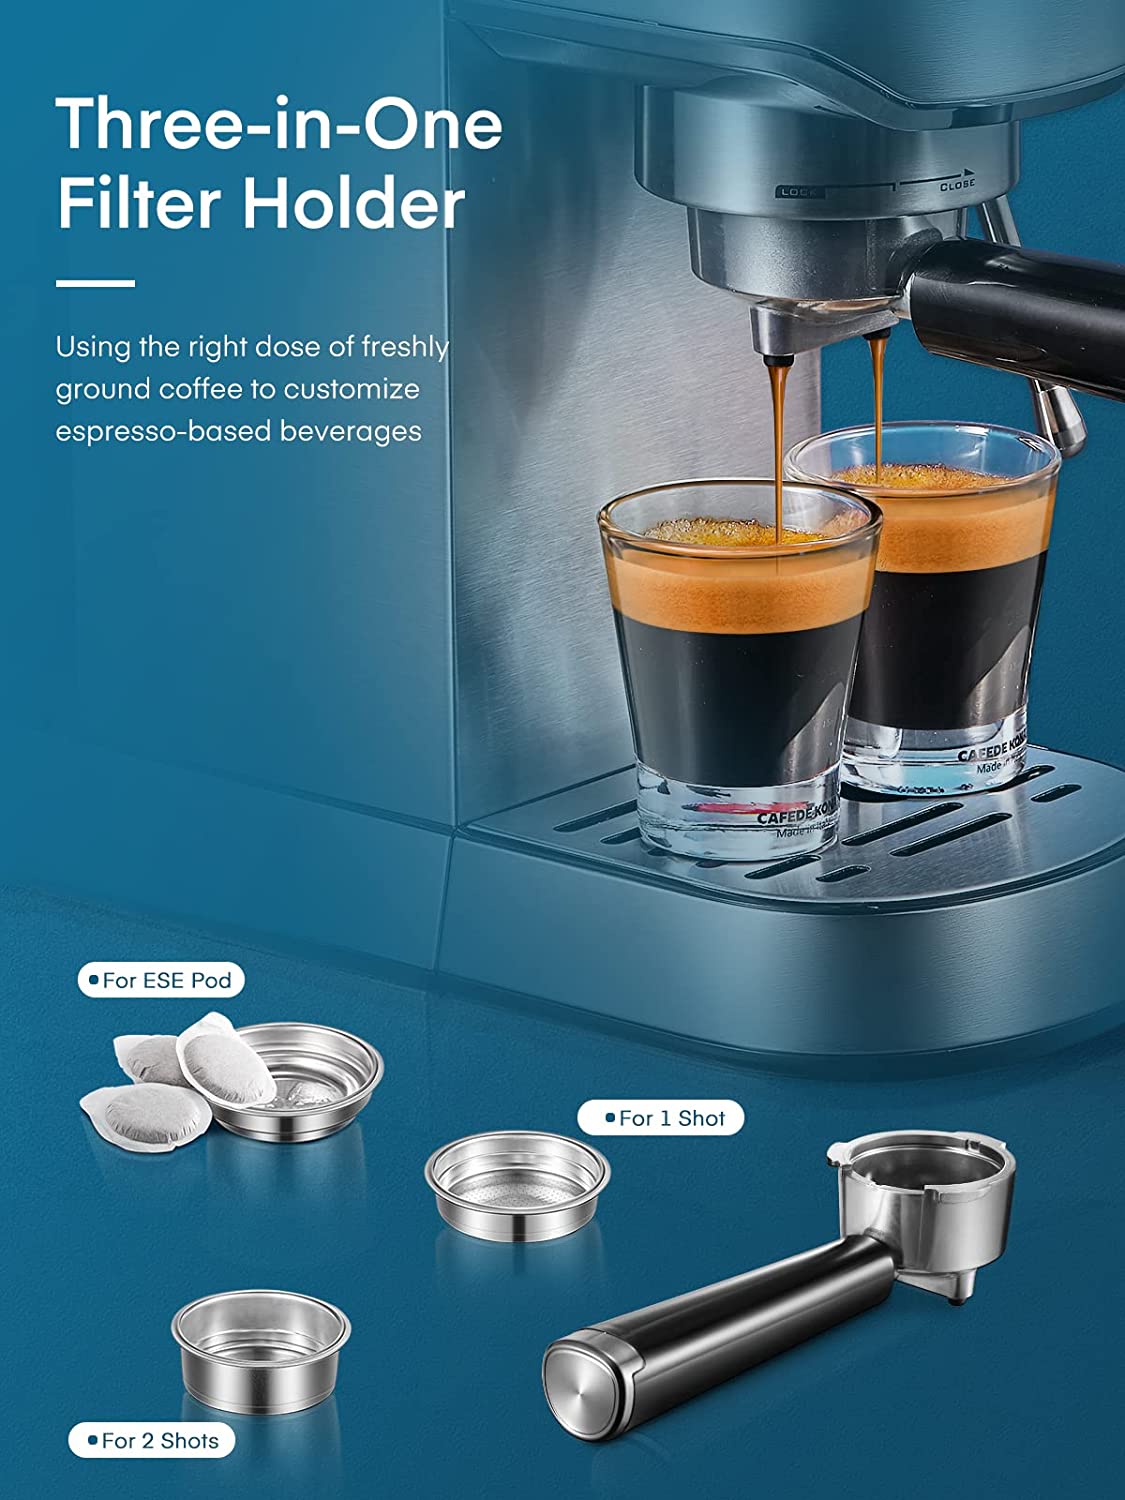 three-in-one filter ho;der, HOUSNAT Espresso Machine, 20 Bar Espresso and Cappuccino Maker with Milk Frother Steam Wand, Professional Espresso Coffee Machine for Cappuccino and Latte, Compact Design, Brushed Stainless Steel